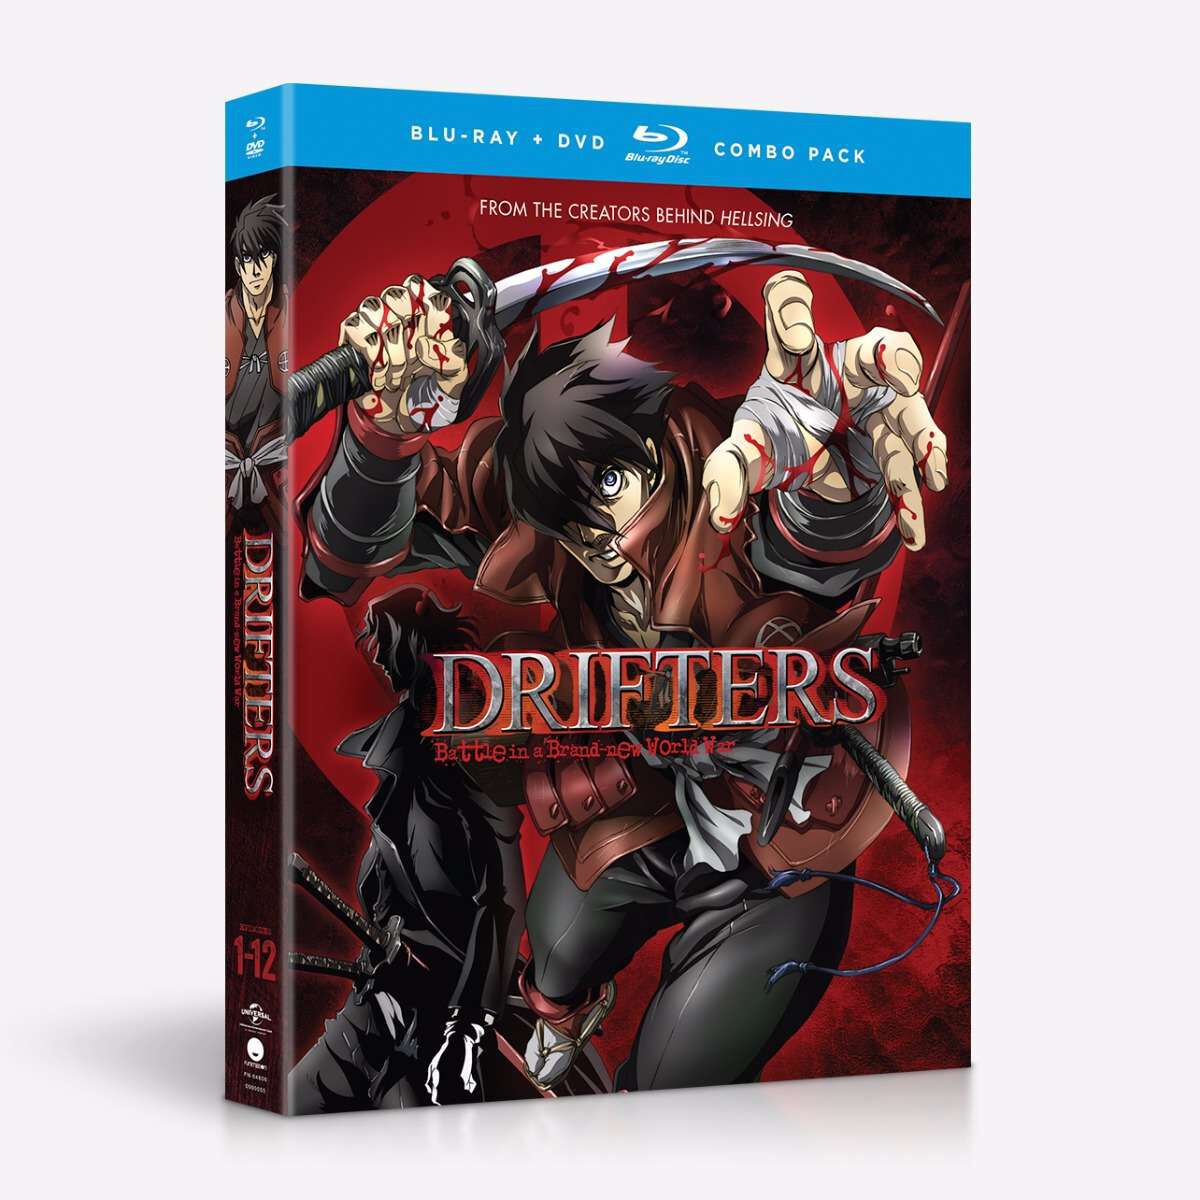 Drifters - The Complete Series - Blu-ray + DVD | Crunchyroll Store